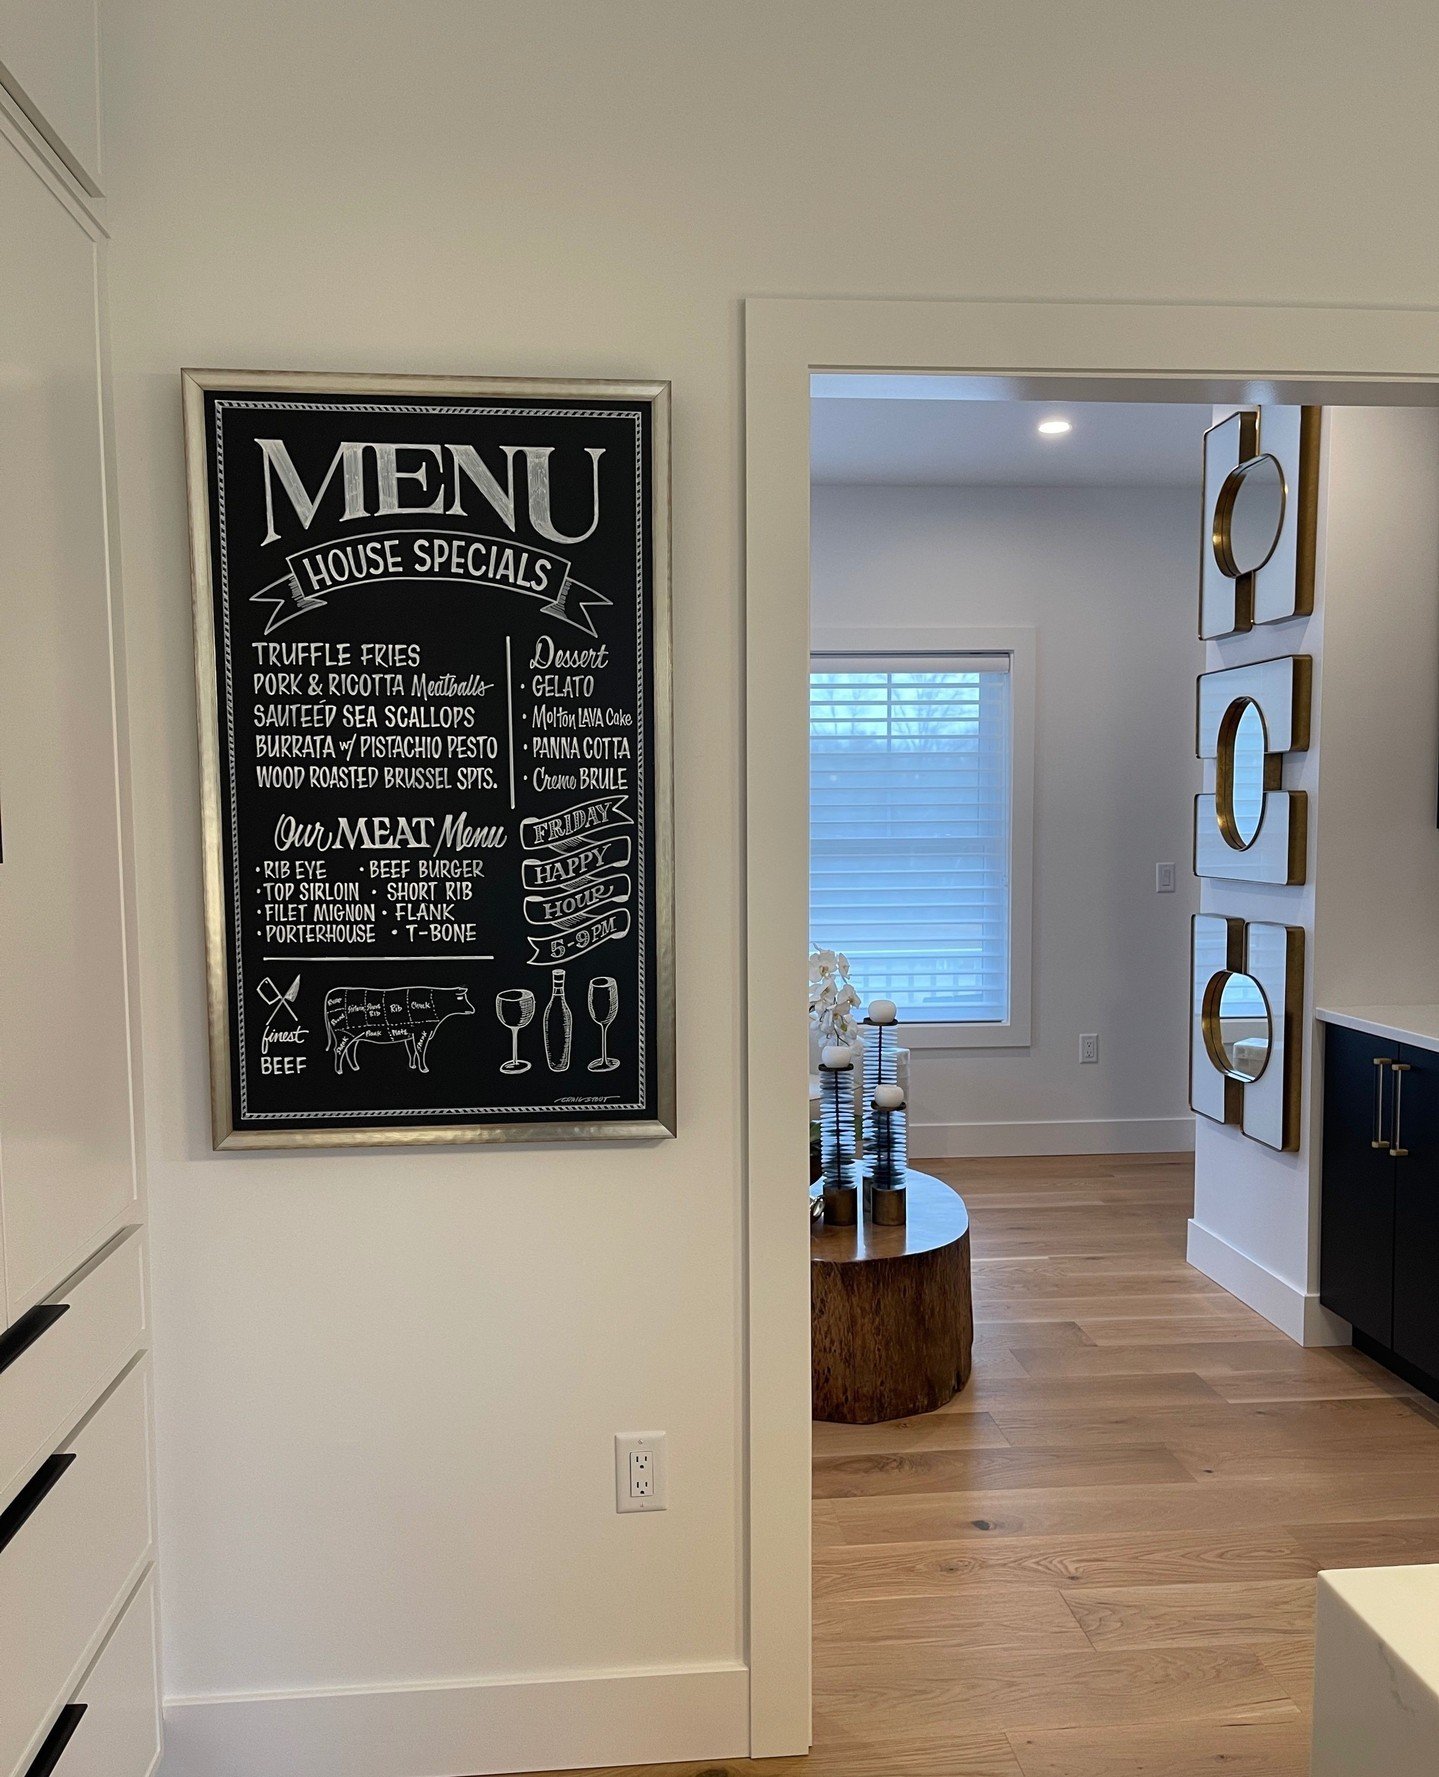 Bringing a touch of personality to our modern kitchen design with a custom chalk sign by @chalksignpro @letteringproct⁠
.⁠
.⁠
.⁠
.⁠
#mydesign #interiordesign #homedecor #interiorinspiration #housebeautiful #luxuryliving #interiordecor #interiorinspo 